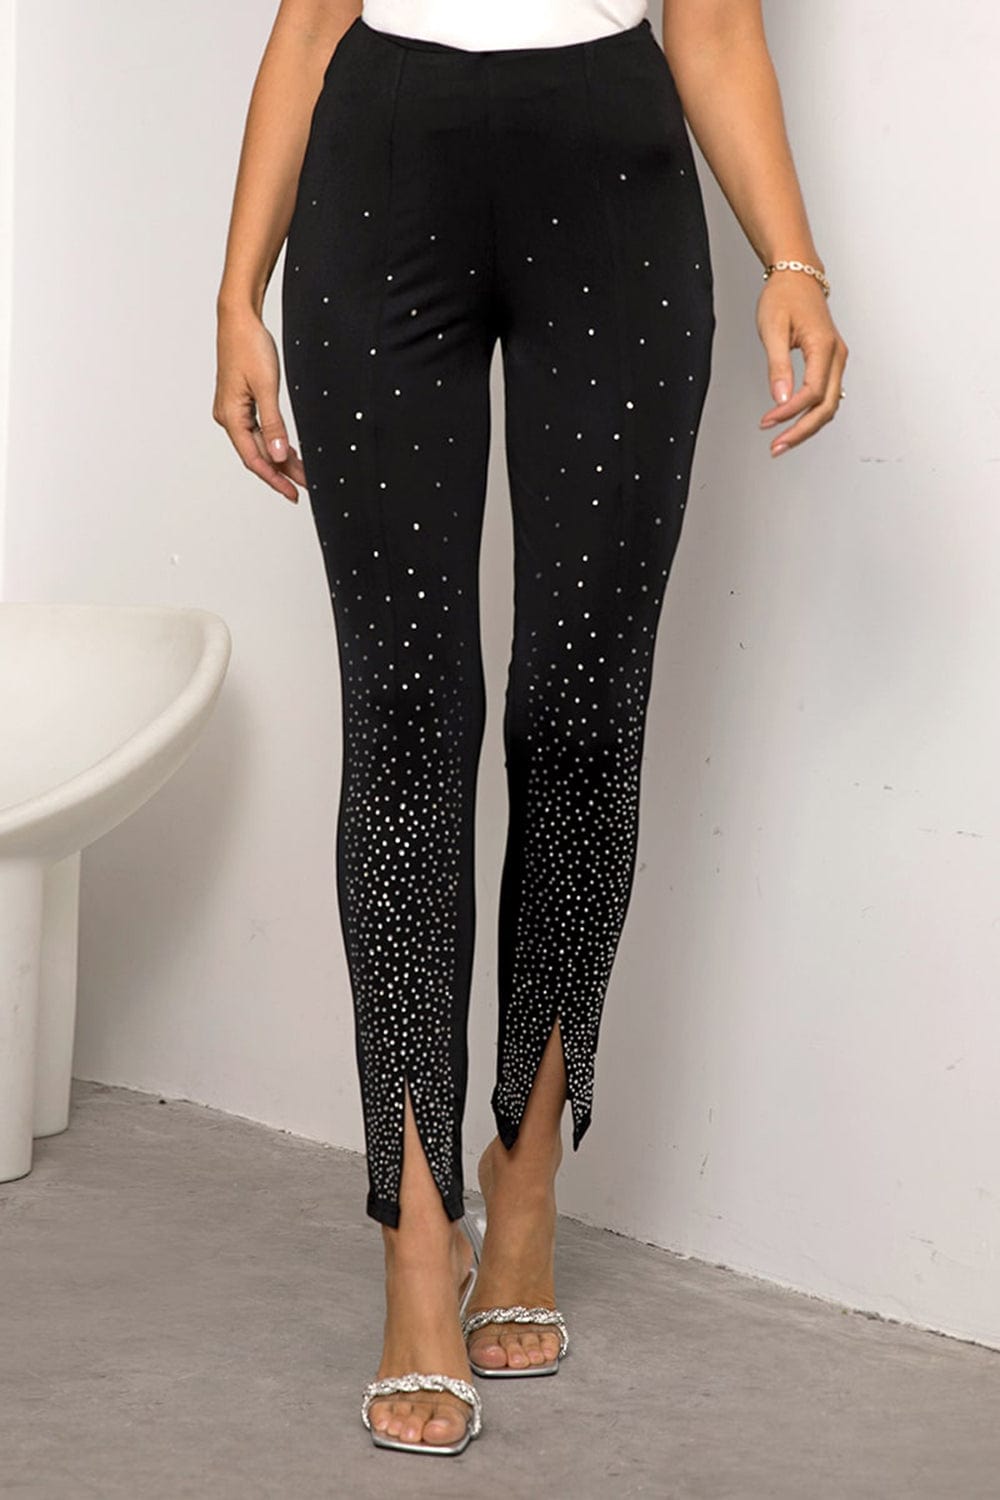 "Image: A pair of Unique Kulture High Waist Front Slit Pants. These stylish pants feature a high waist design and a front slit detail, giving them a trendy and fashionable look. The pants are made from high-quality fabric and are available in various colors and sizes, making them a versatile addition to any wardrobe."